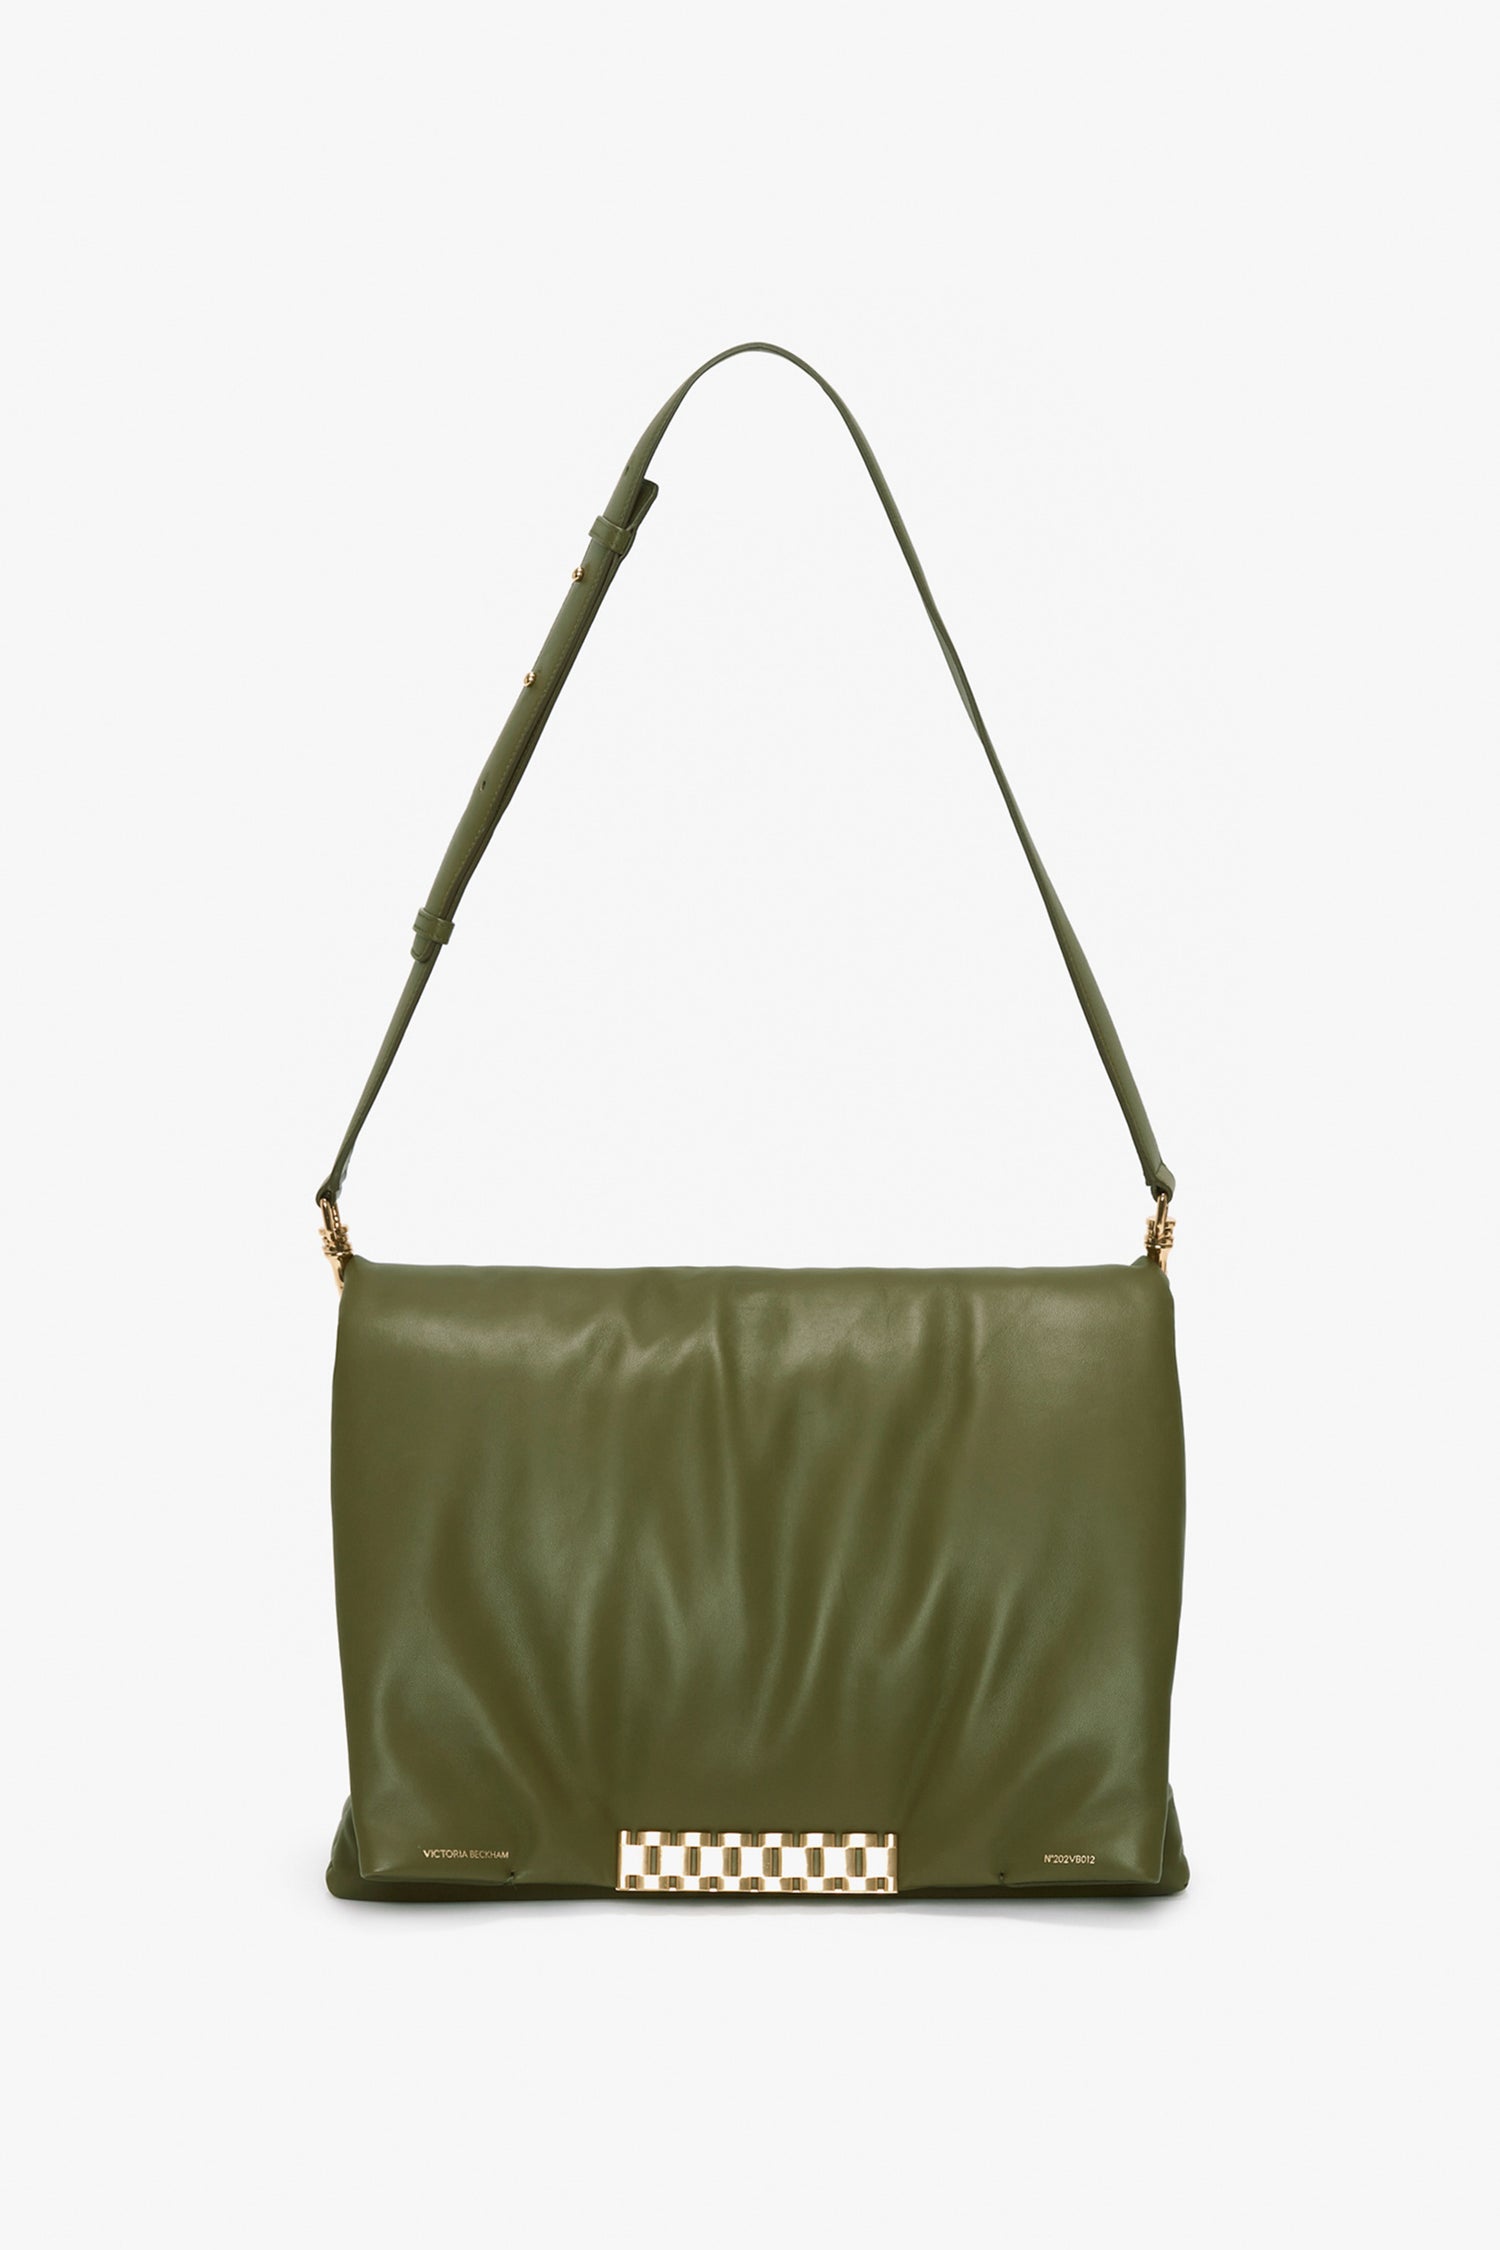 A chic Victoria Beckham Puffy Jumbo Chain Pouch In Khaki Leather with an elegant gold checkered clasp on the front center, featuring an adjustable shoulder strap for versatility.